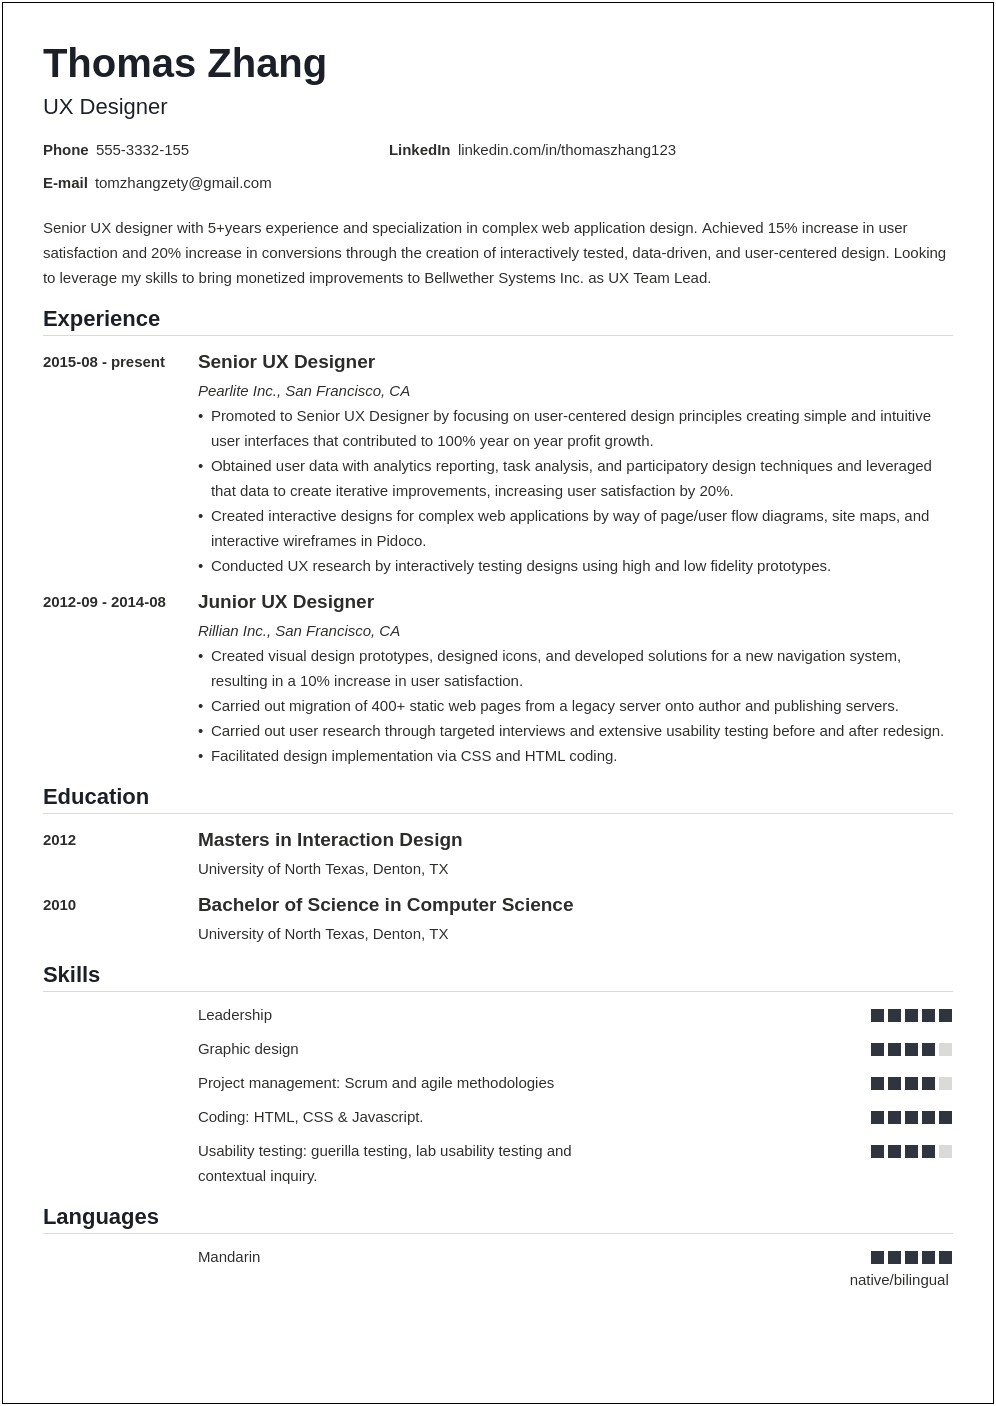 Resume Objective For User Experience Researcher